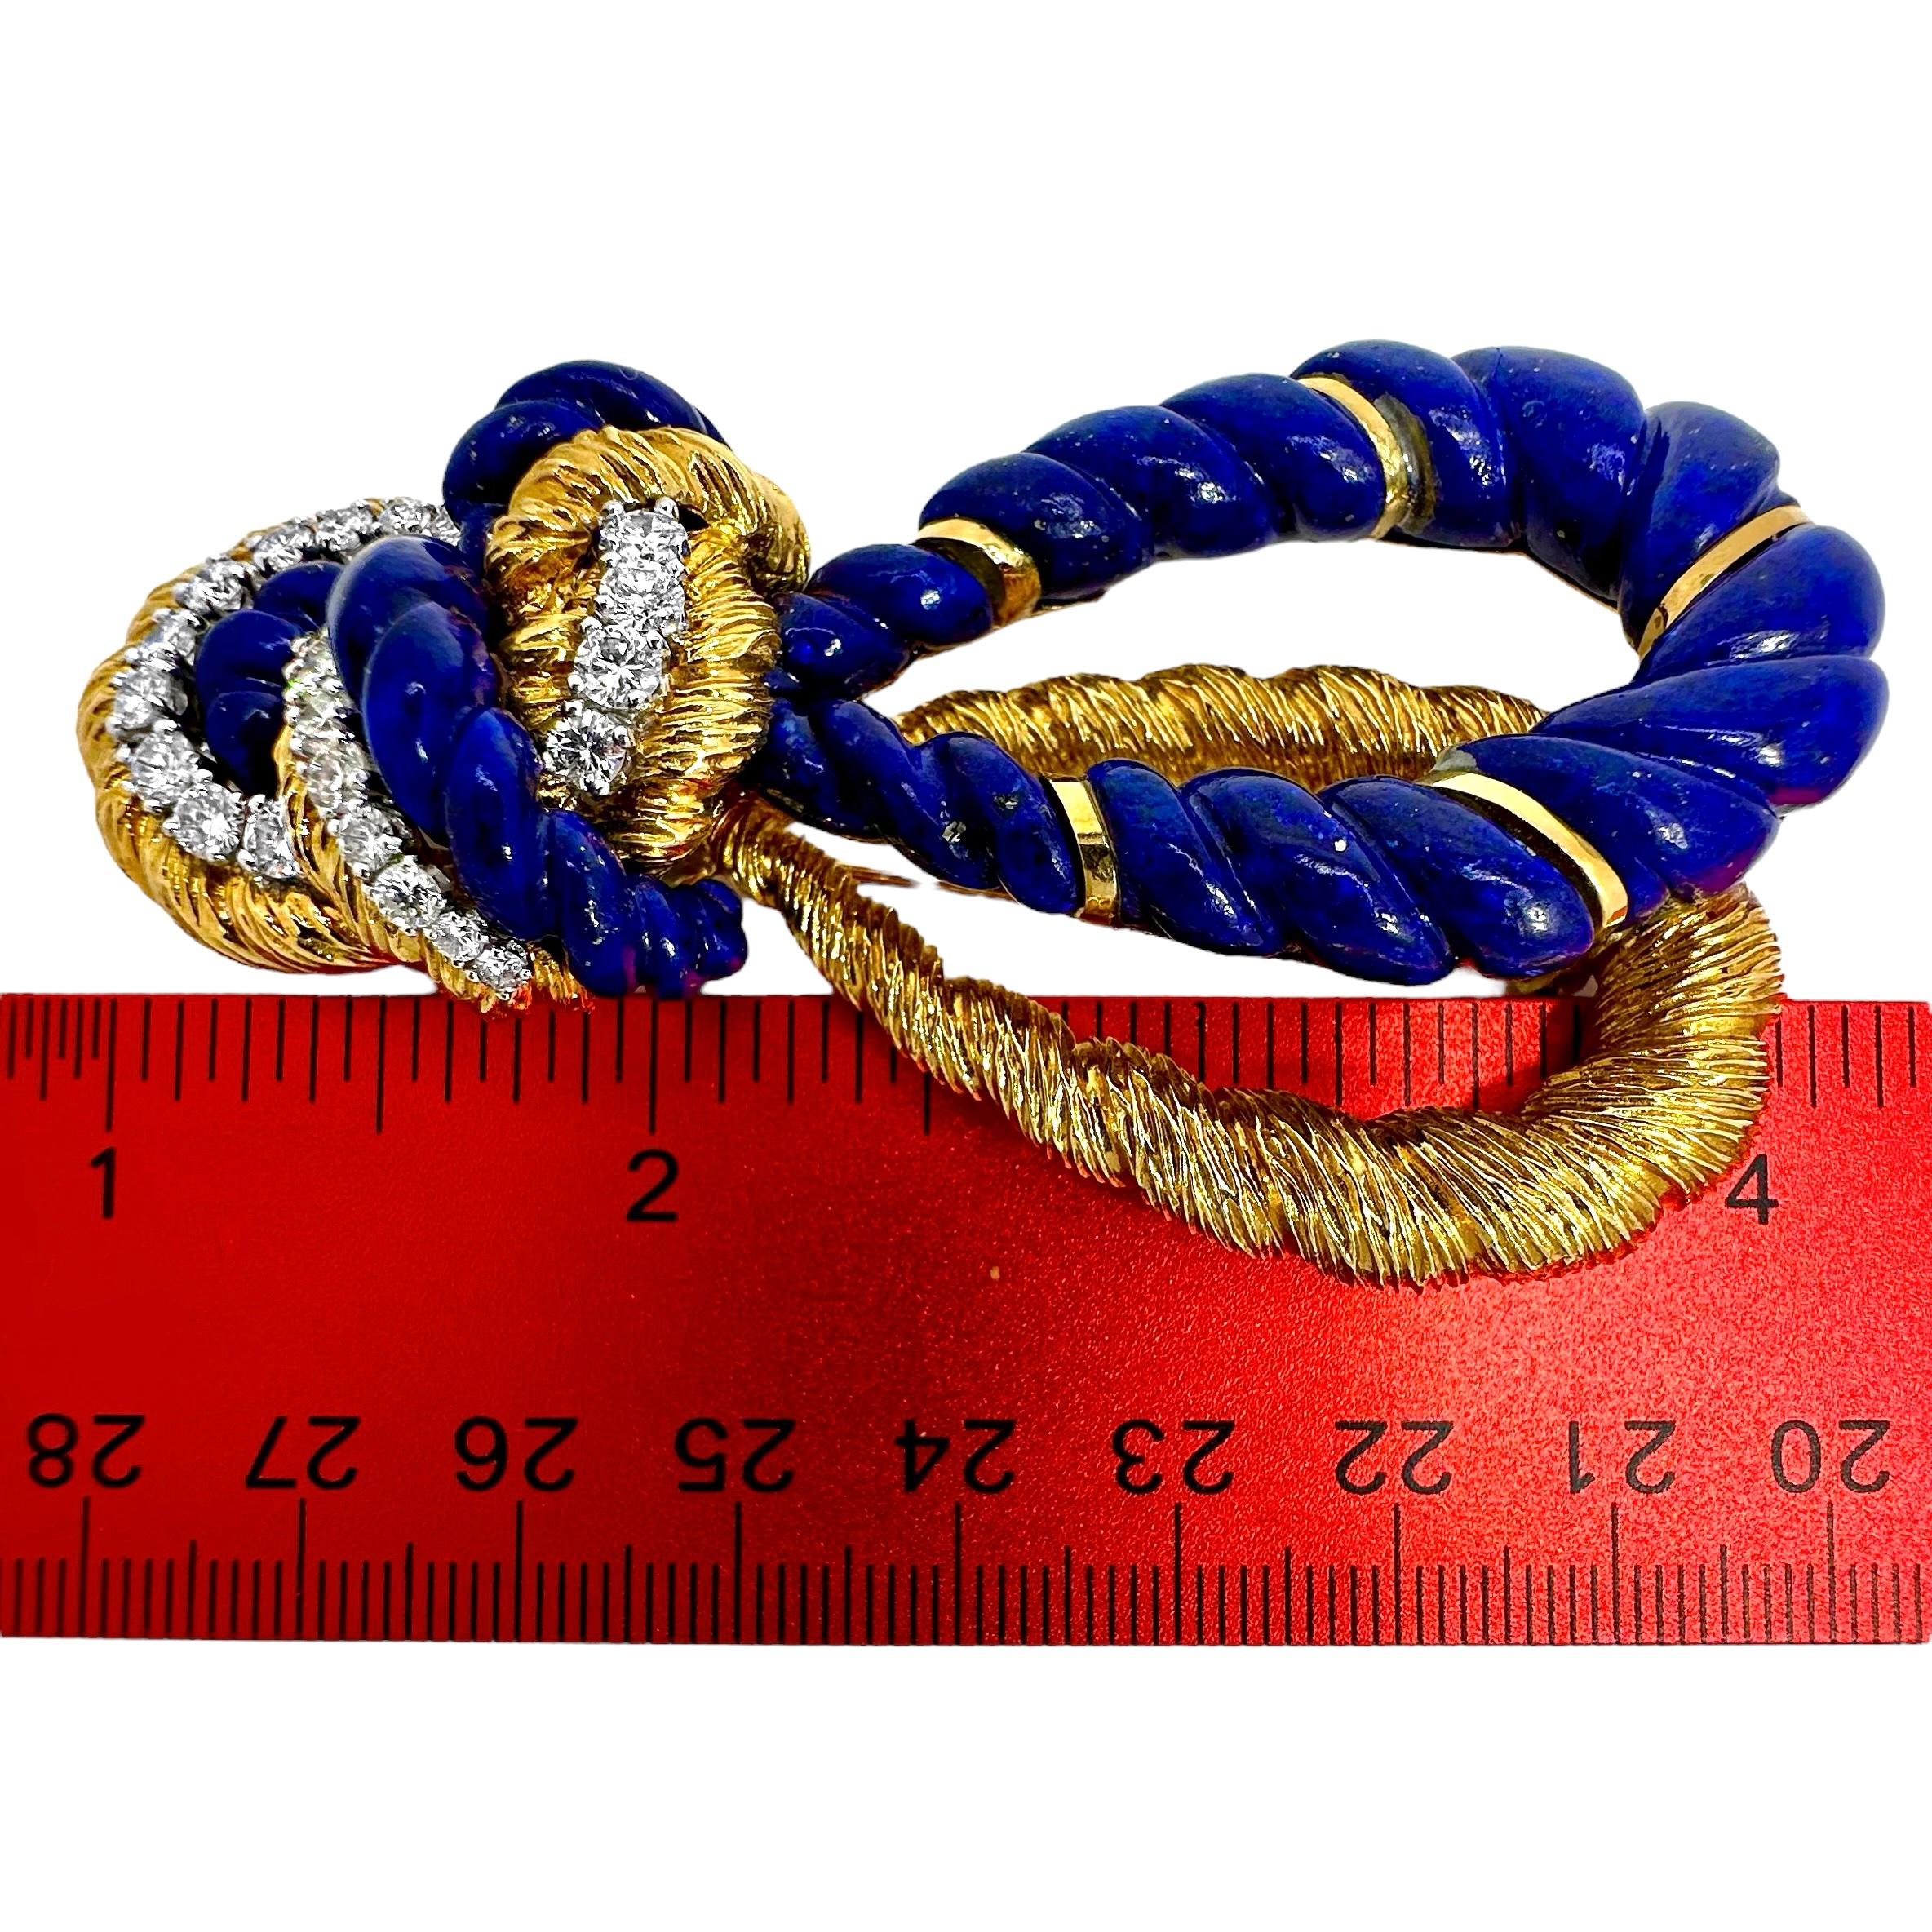 Wander France Yellow Gold Knot Brooch with Diamonds and Lapis Lazuli For Sale 2